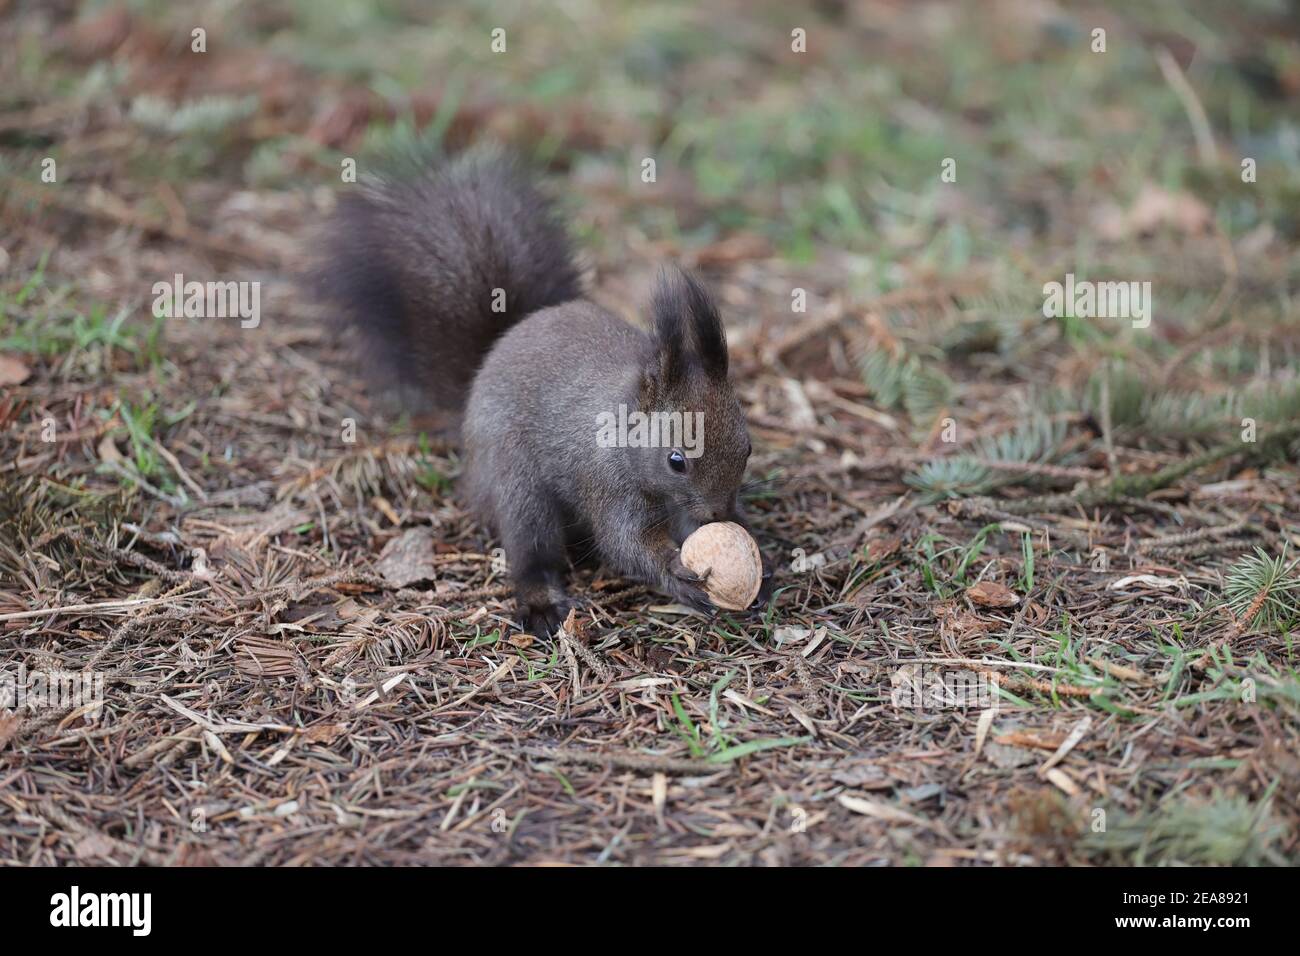 A squirrel stands on the ground holding a walnut with its paws Stock Photo